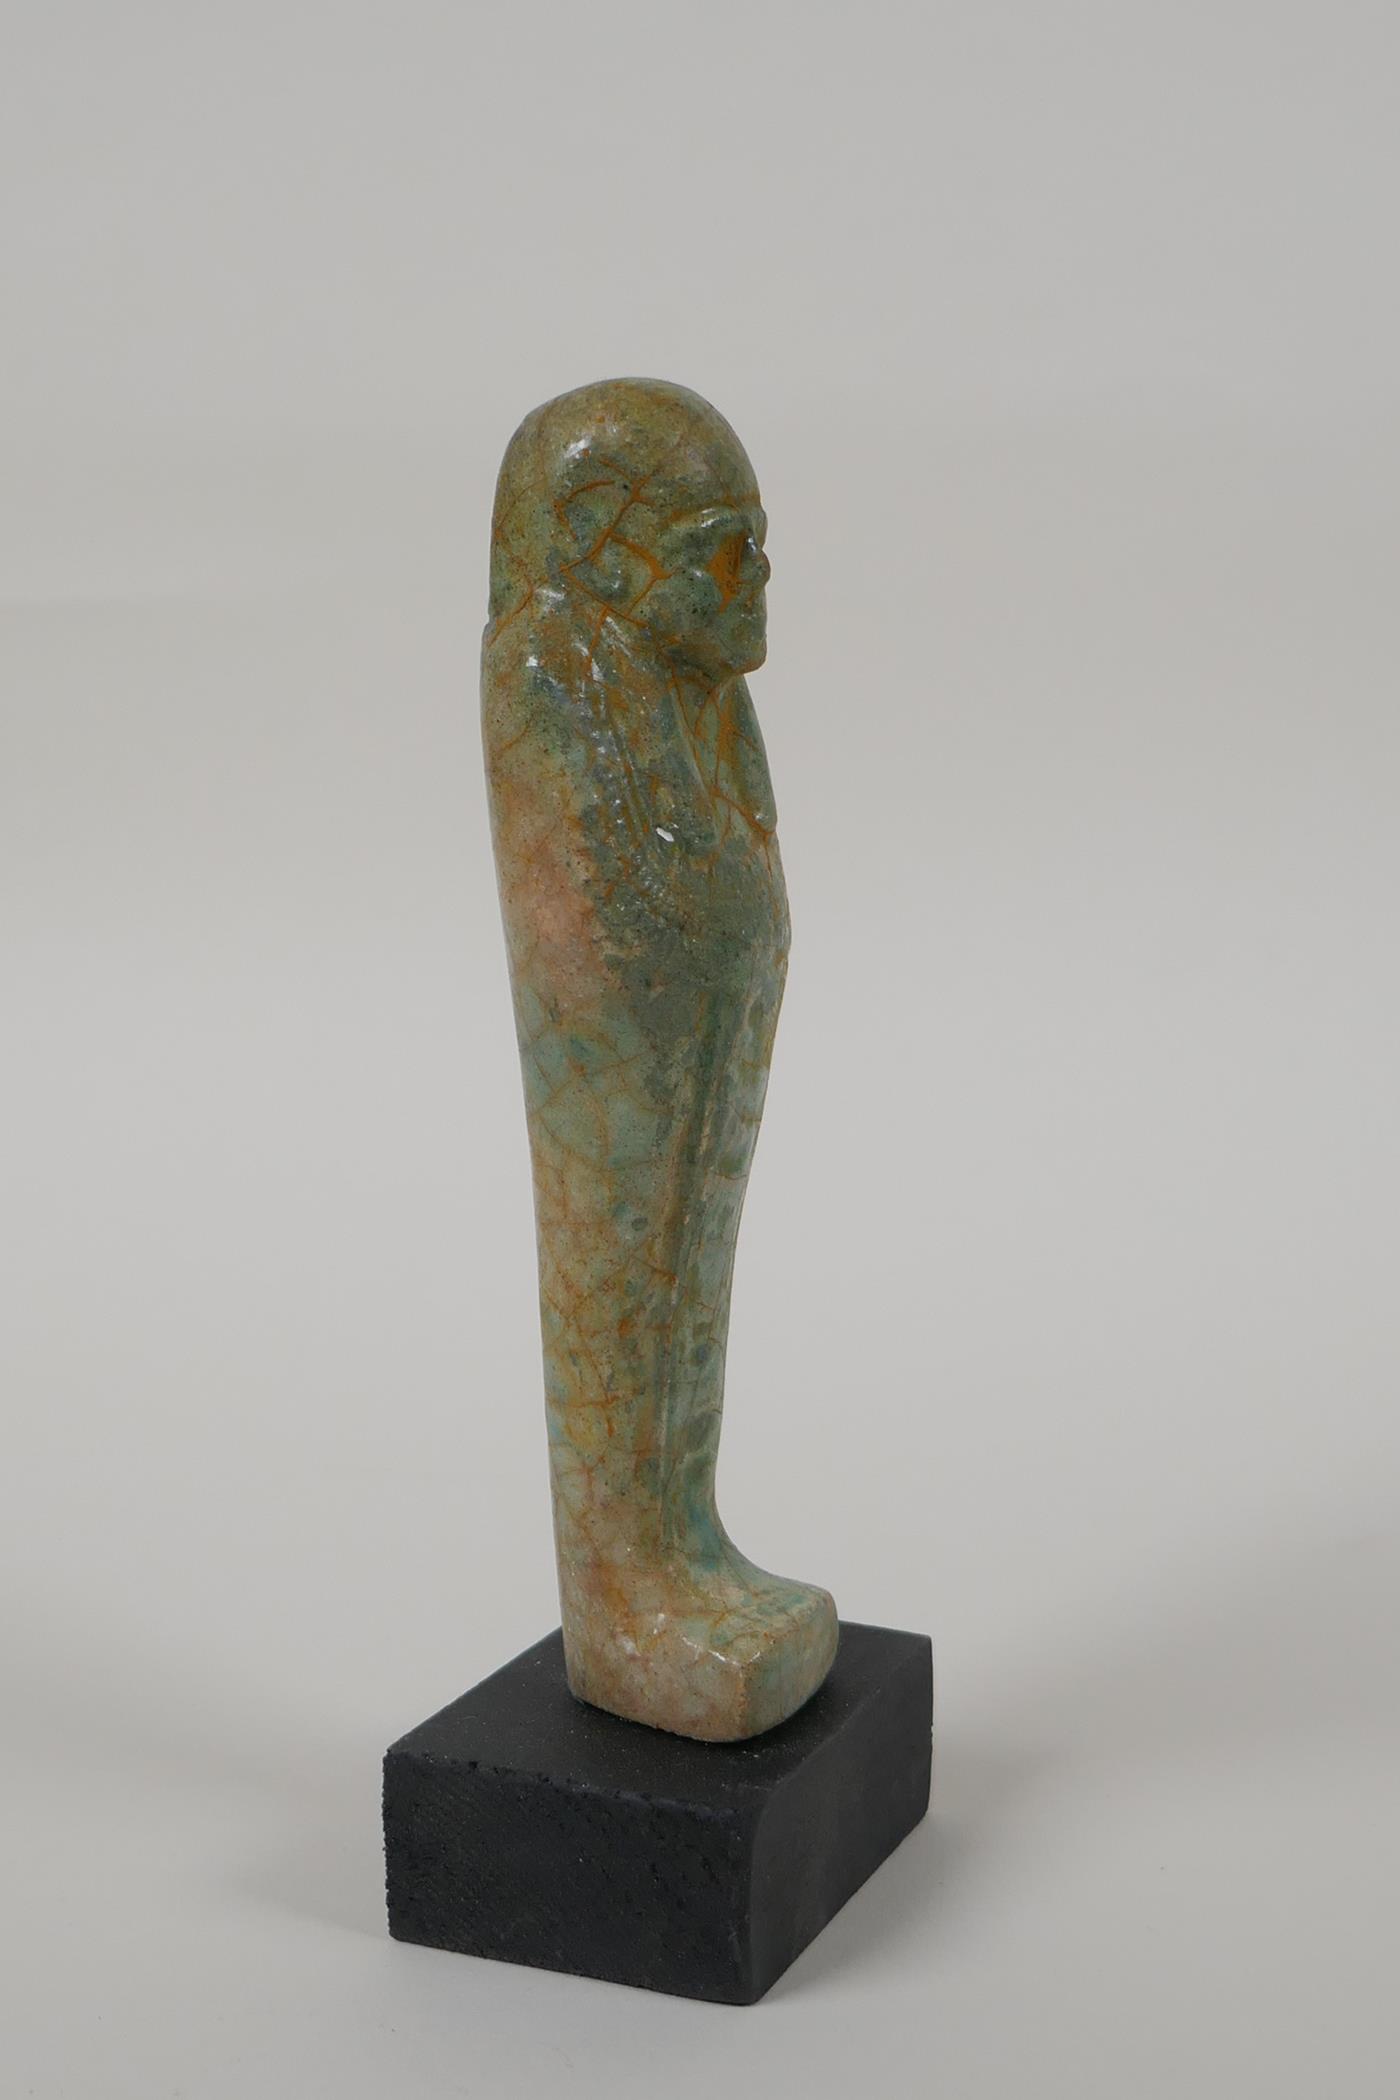 An Egyptian turquoise glazed faience shabti, mounted on a display base, 6" high - Image 2 of 4